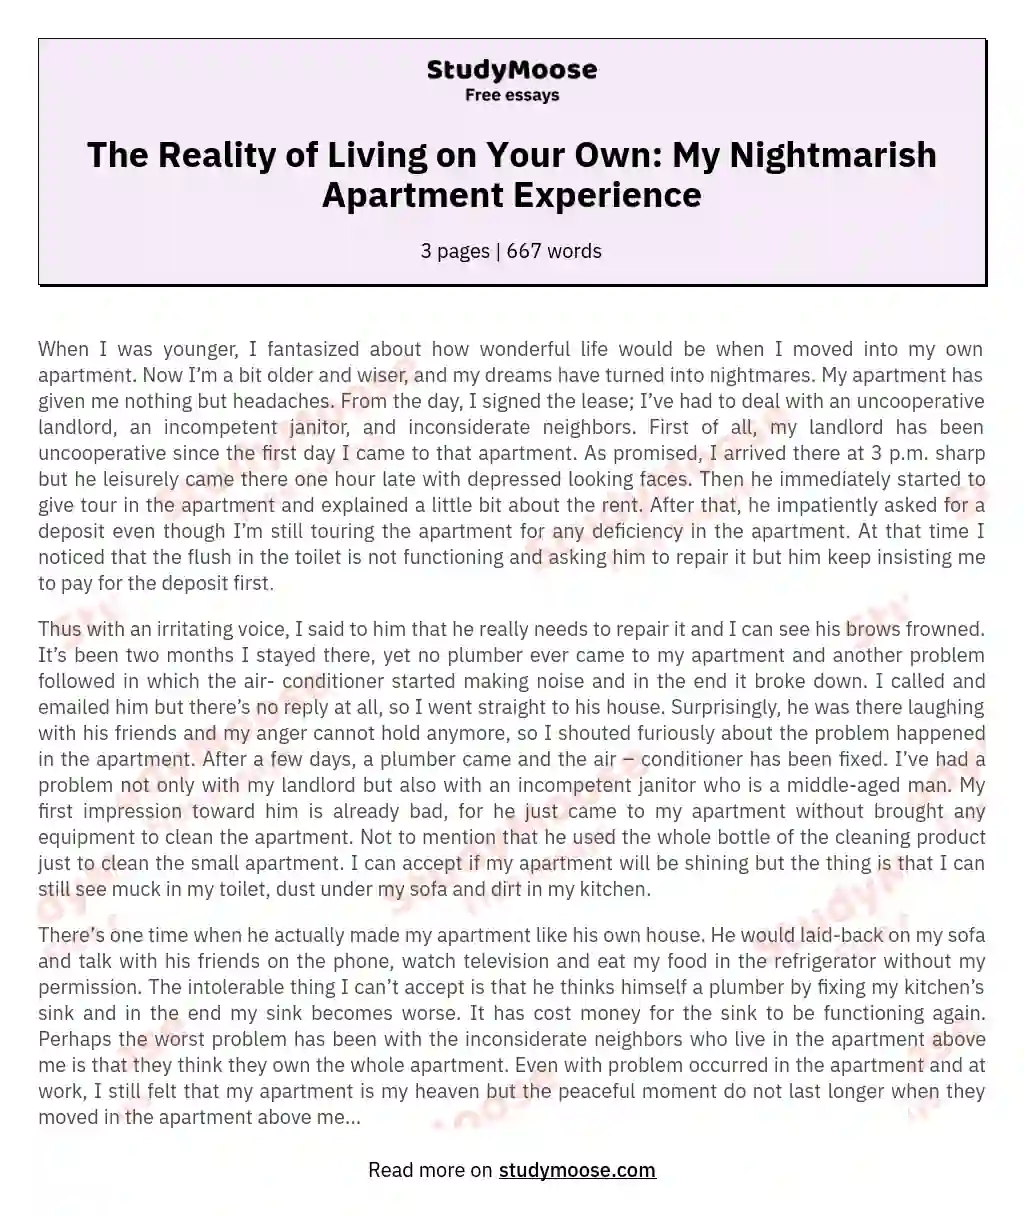 The Reality of Living on Your Own: My Nightmarish Apartment Experience essay